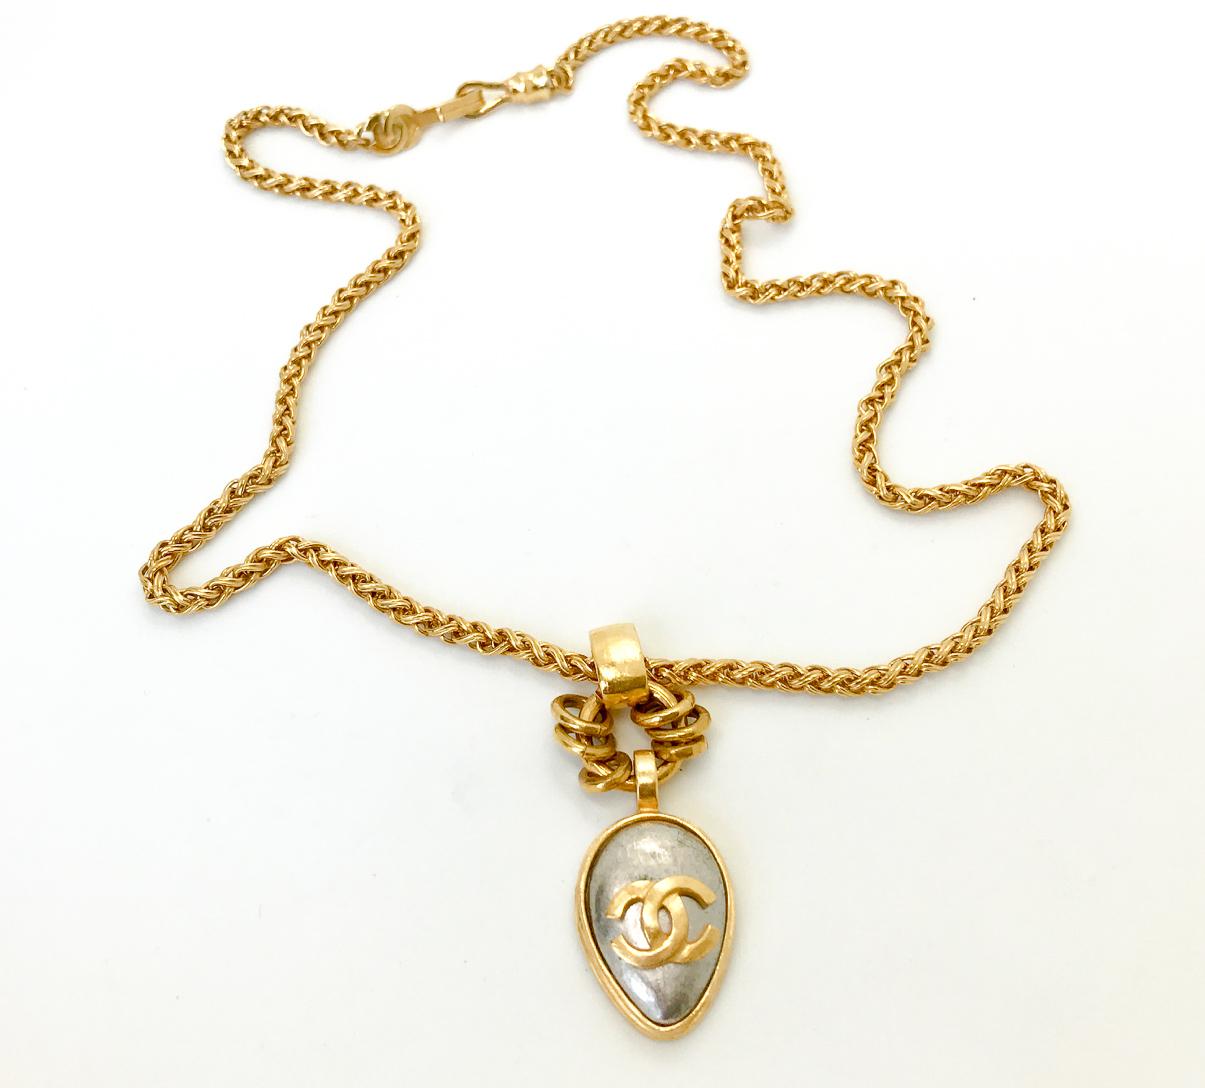 Chanel 1990s 24 Karat Gold Plated Pendant Necklace For Sale 1